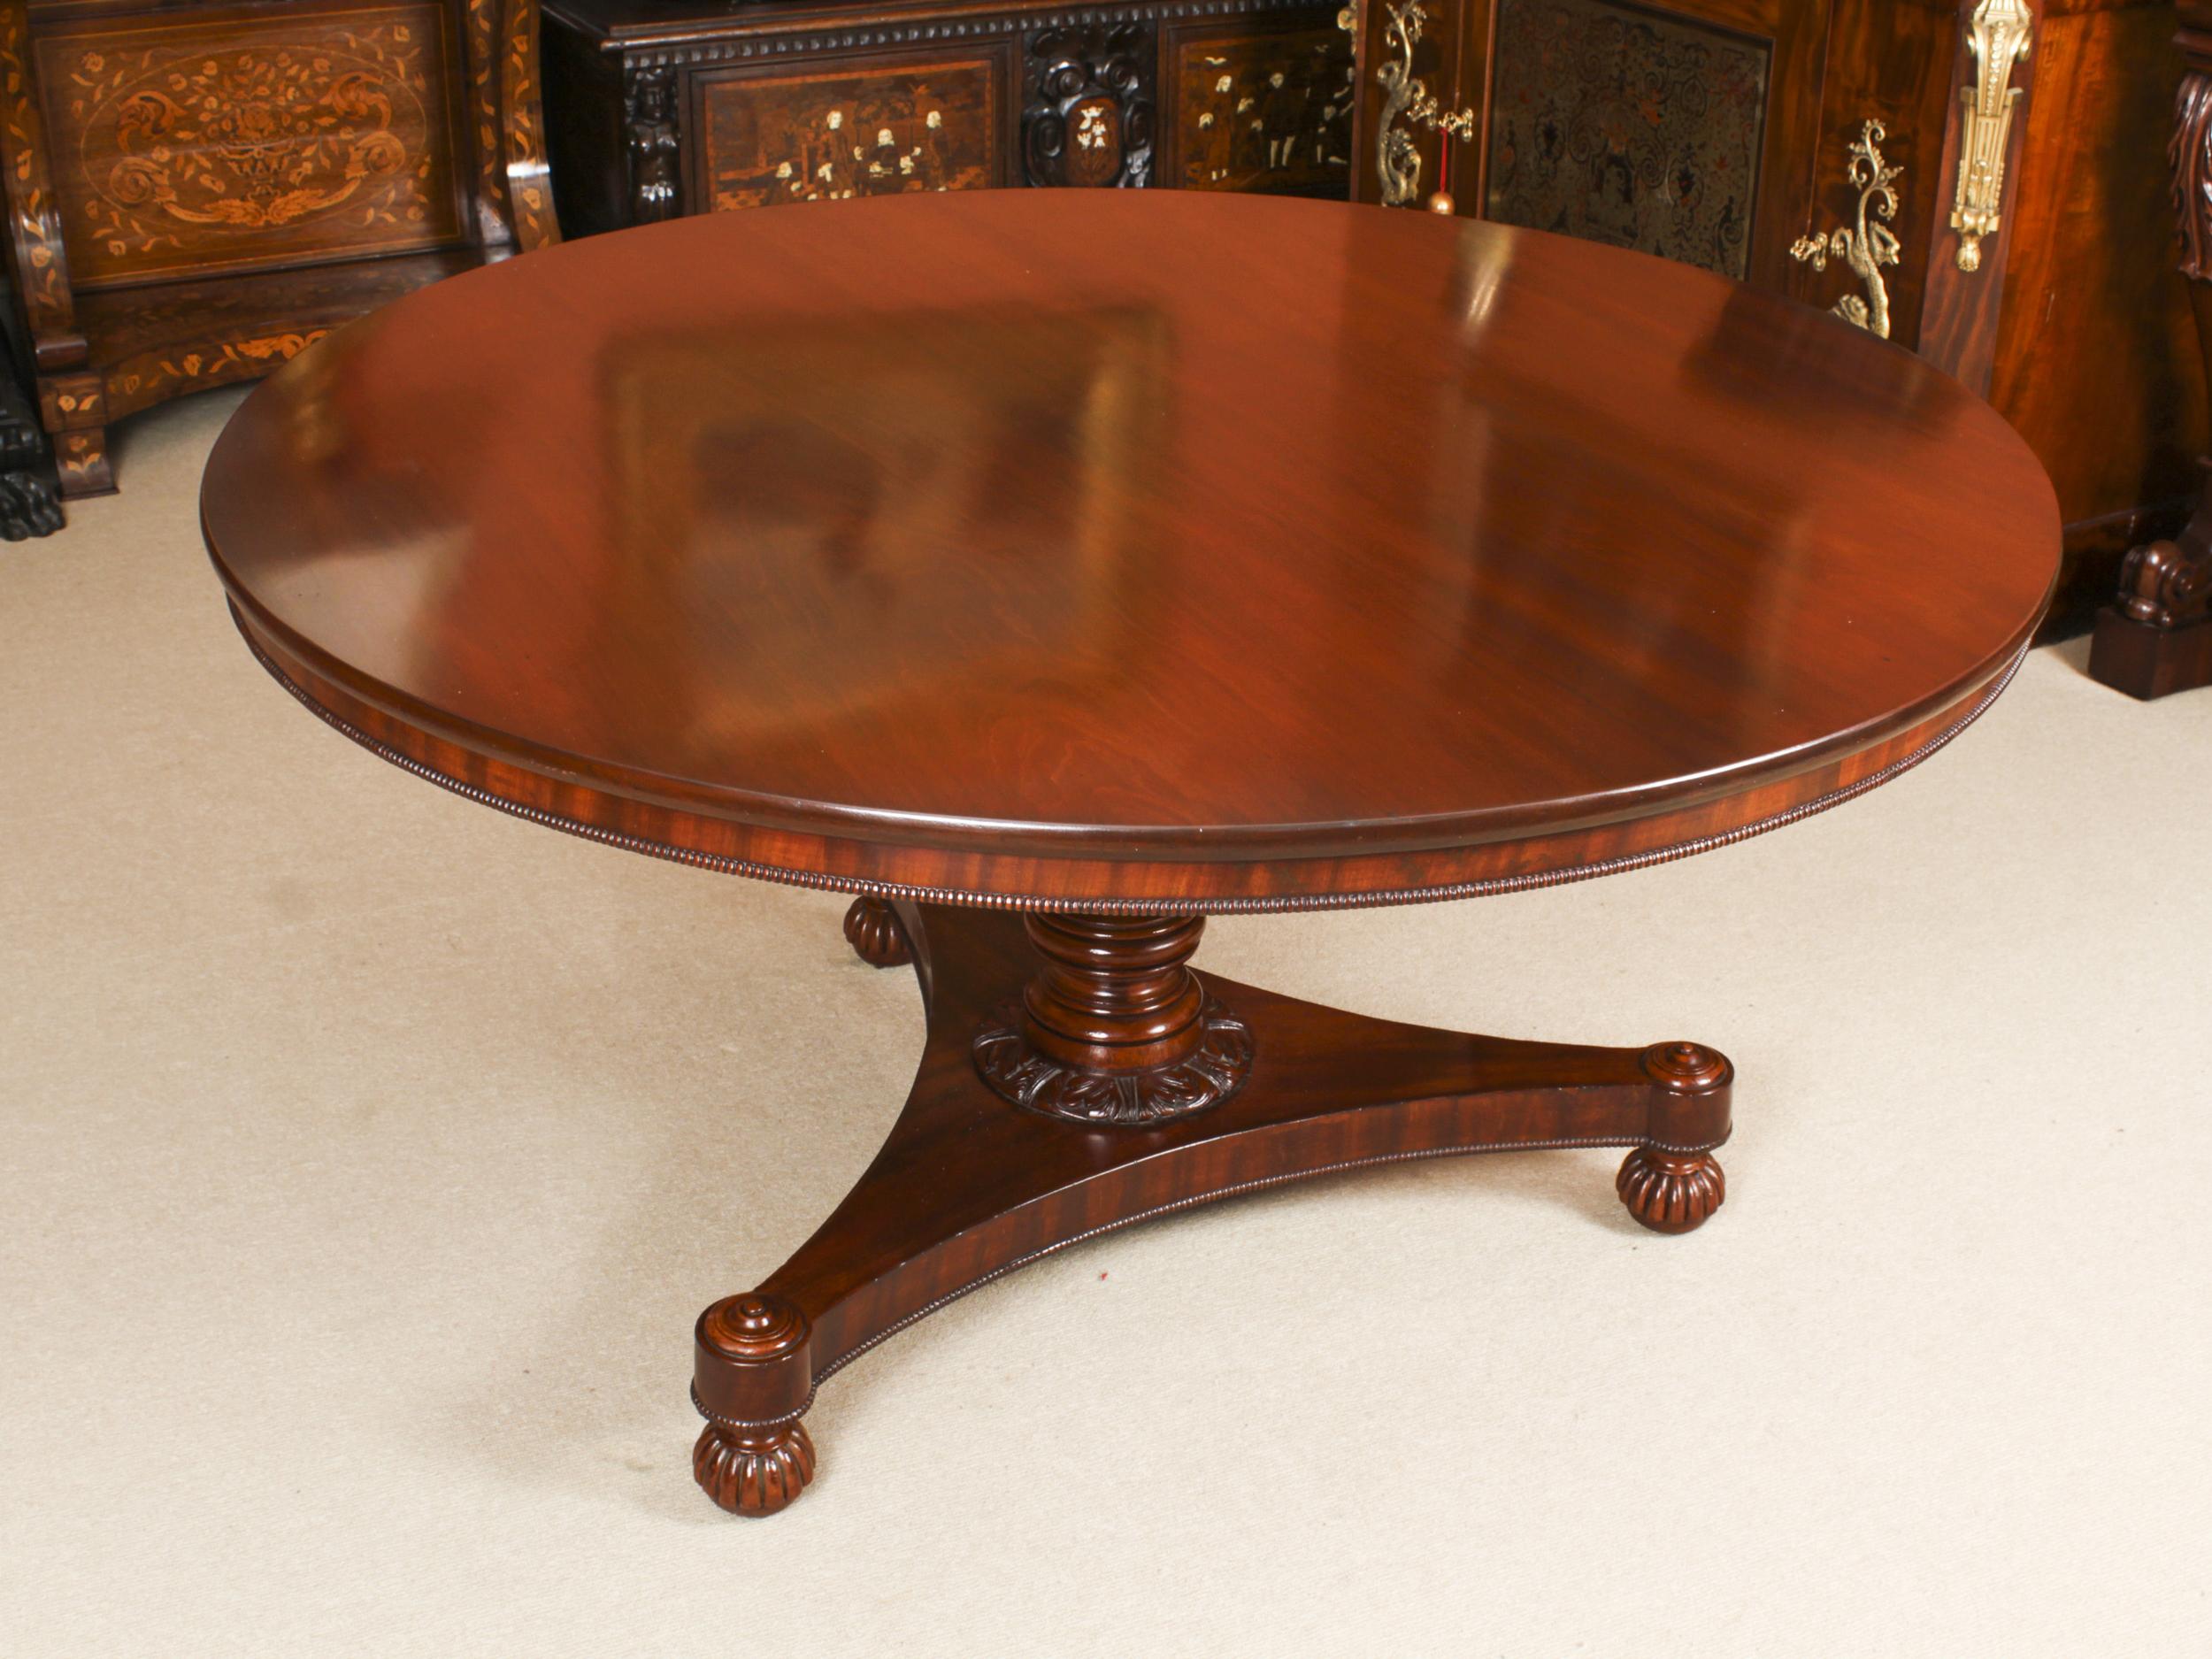 A fine antique William IV mahogany dining table, circa 1830 indate.

The circular snap top is made from beautiful mahogany, it features a beaded apron and is raised on a turned and reeded column with decorative carved acanthus at the base. The